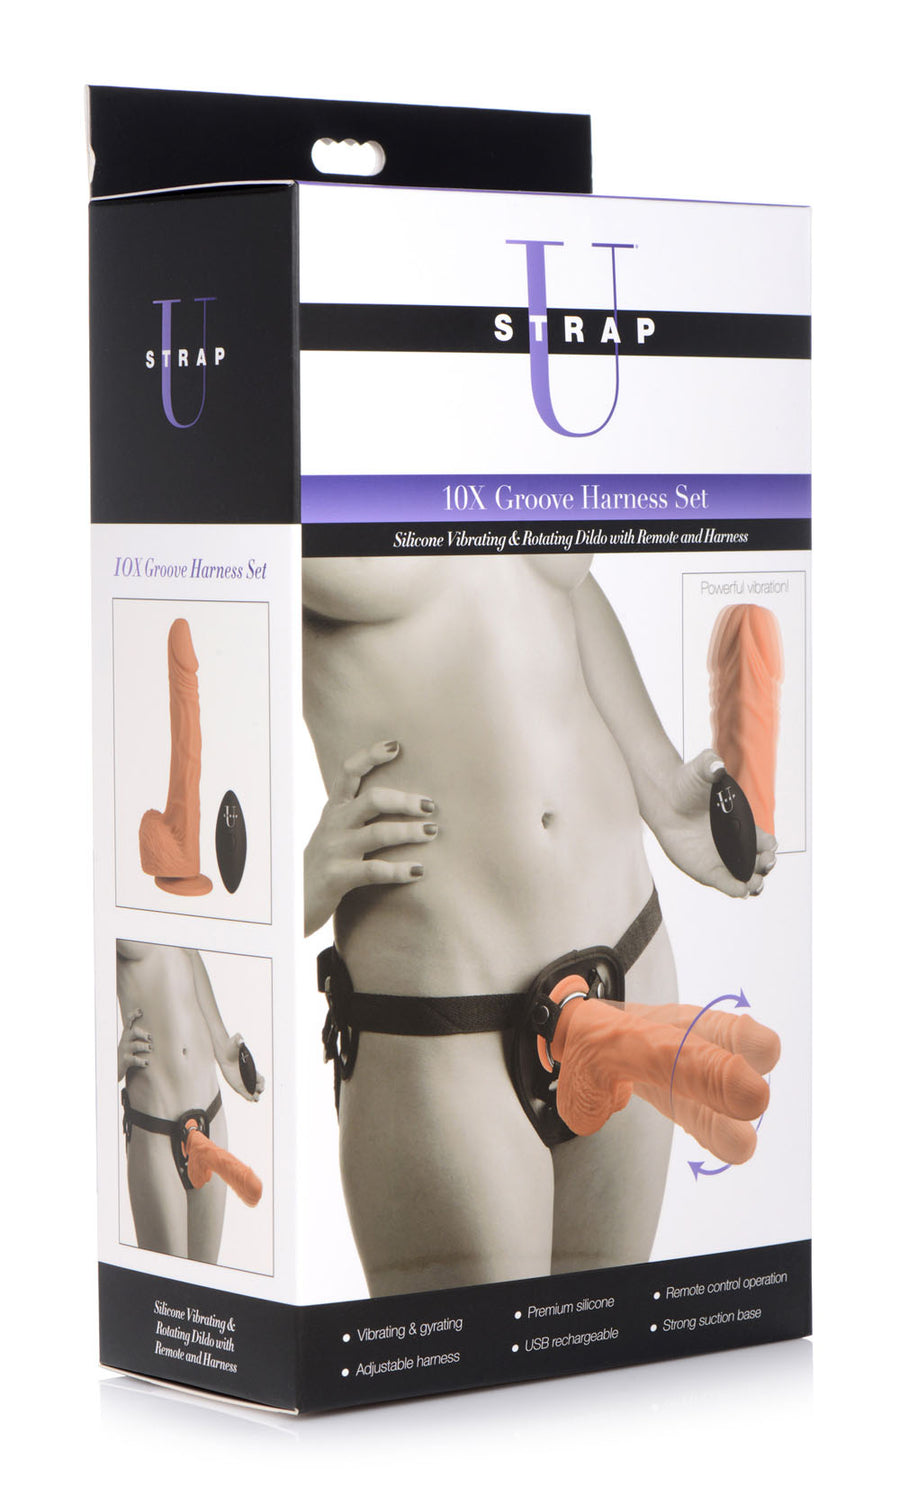 10x Groove Harness With Vibrating & Rotating 8 Inch Dildo